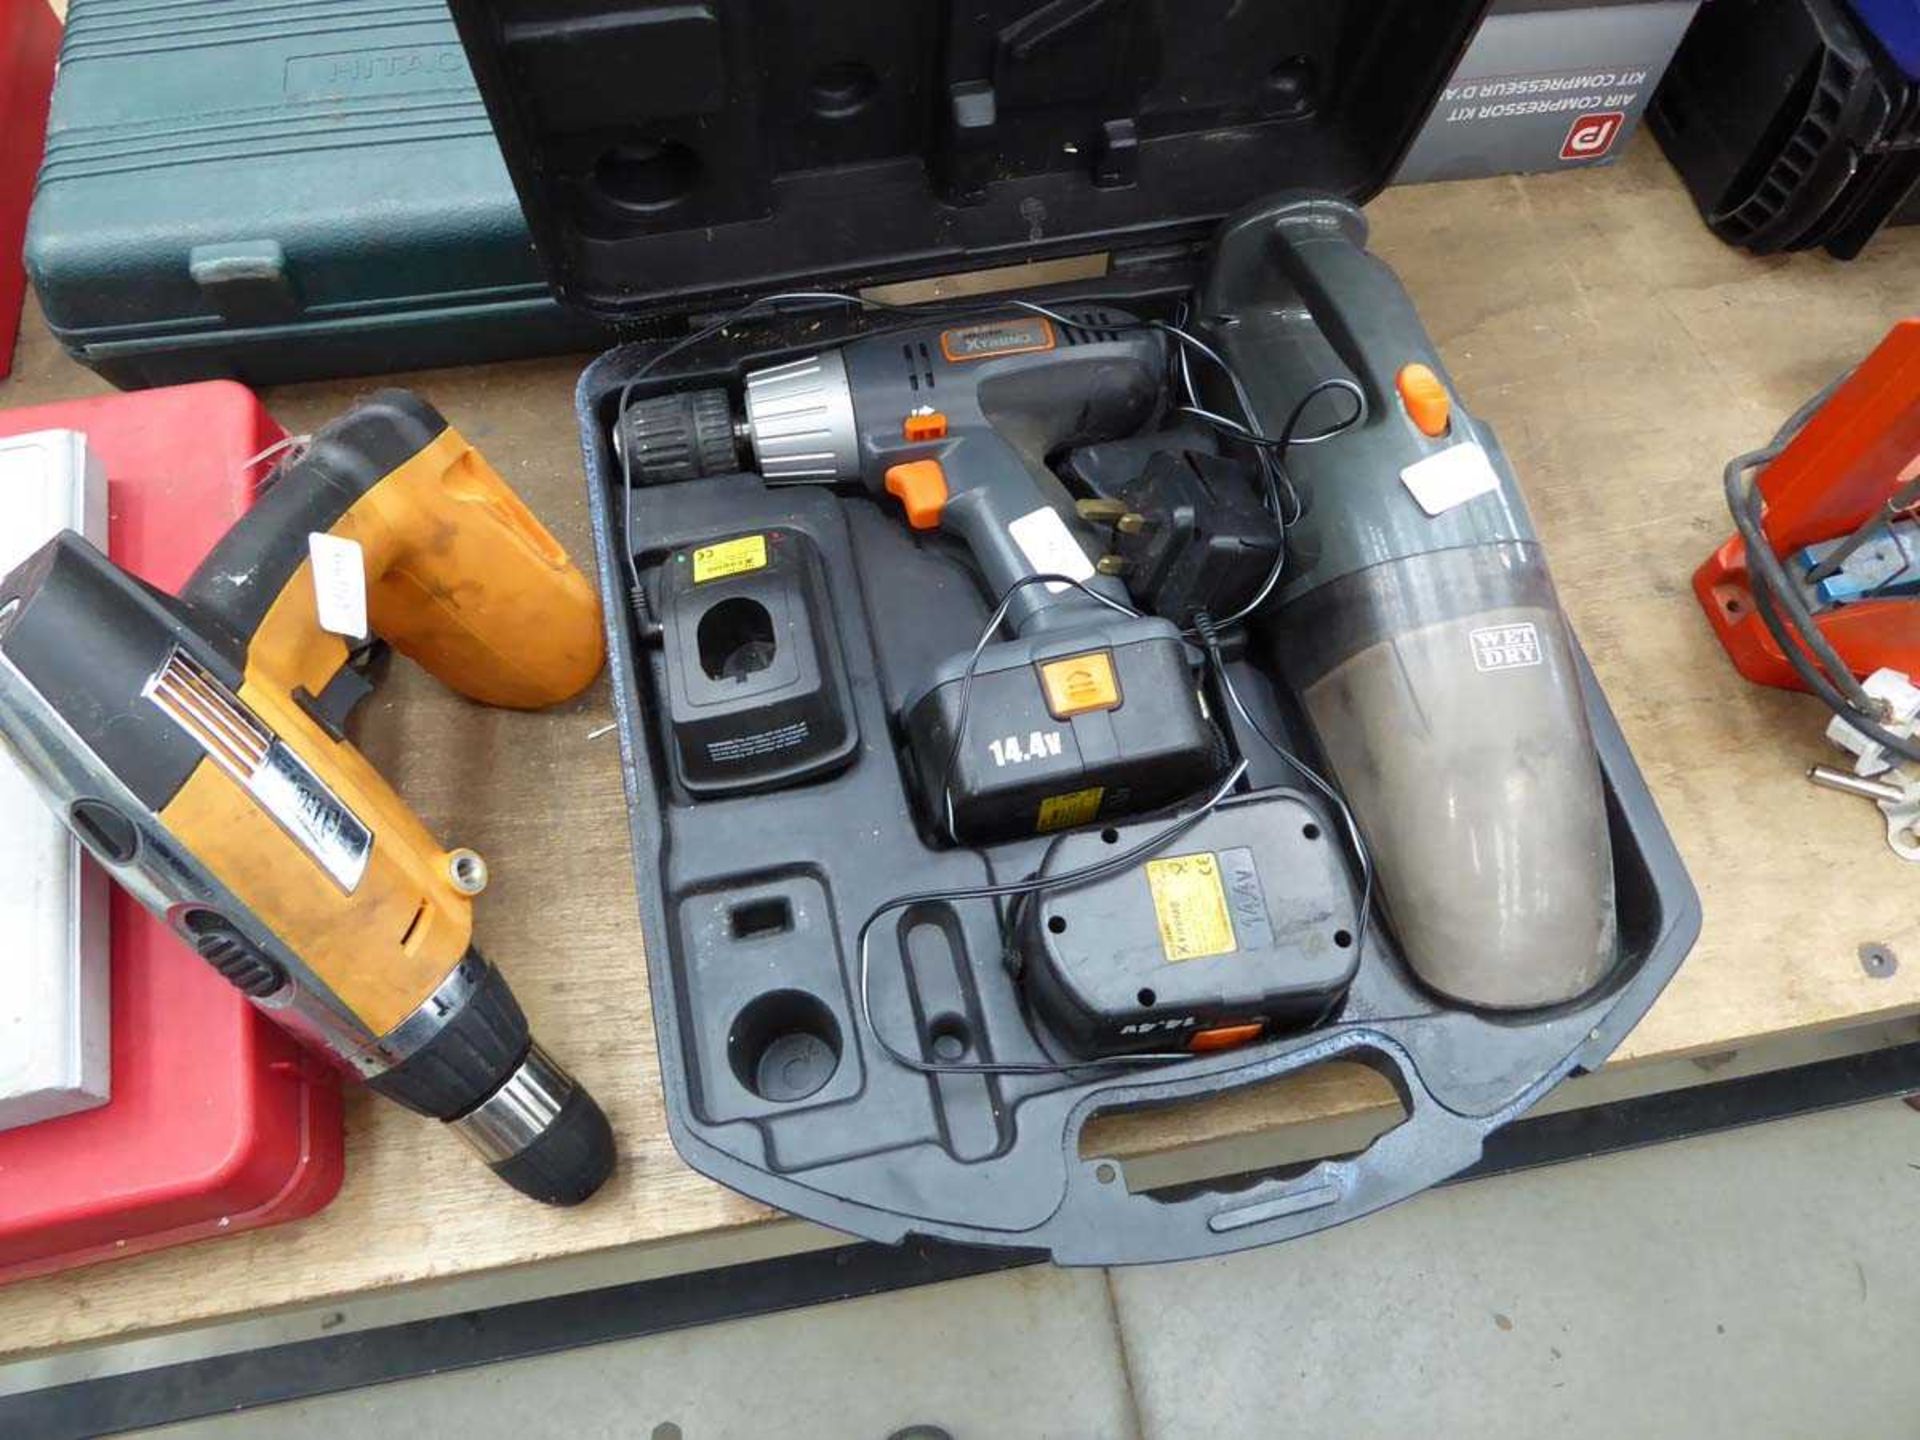 JCB battery drill, no battery or charger; and Challenge Extreme drill and vacuum kit, with 2